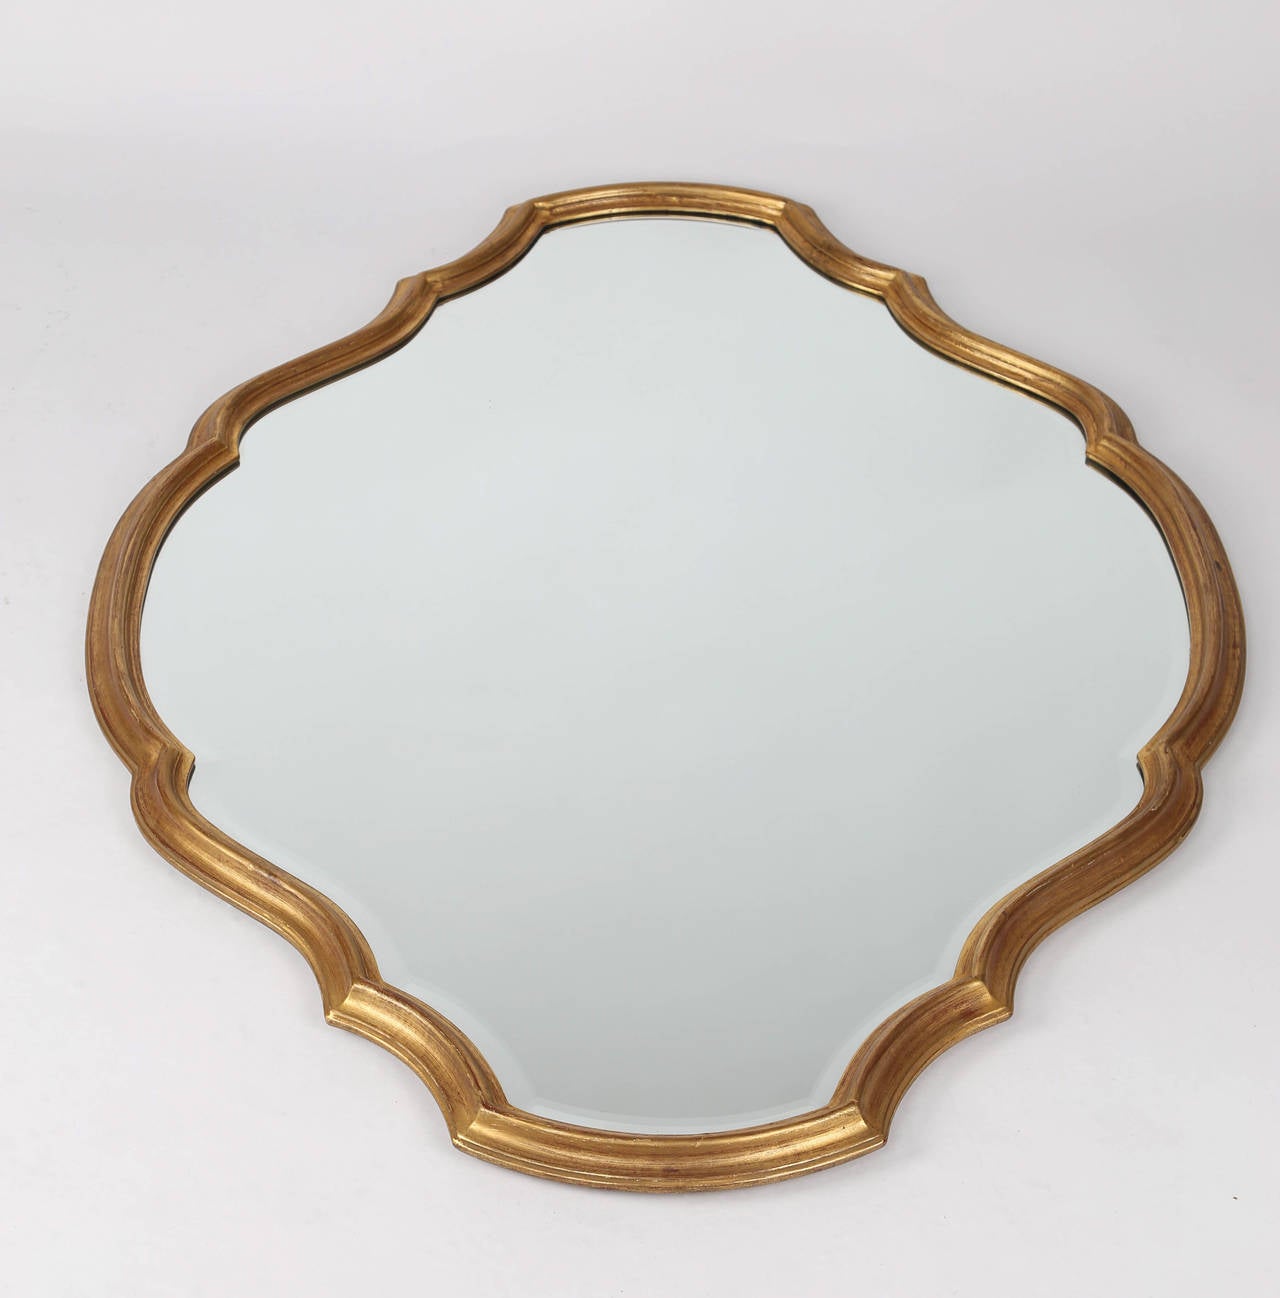 Large mirror in whimsical, symmetrical frame. The gilt-wood frame is 1.5